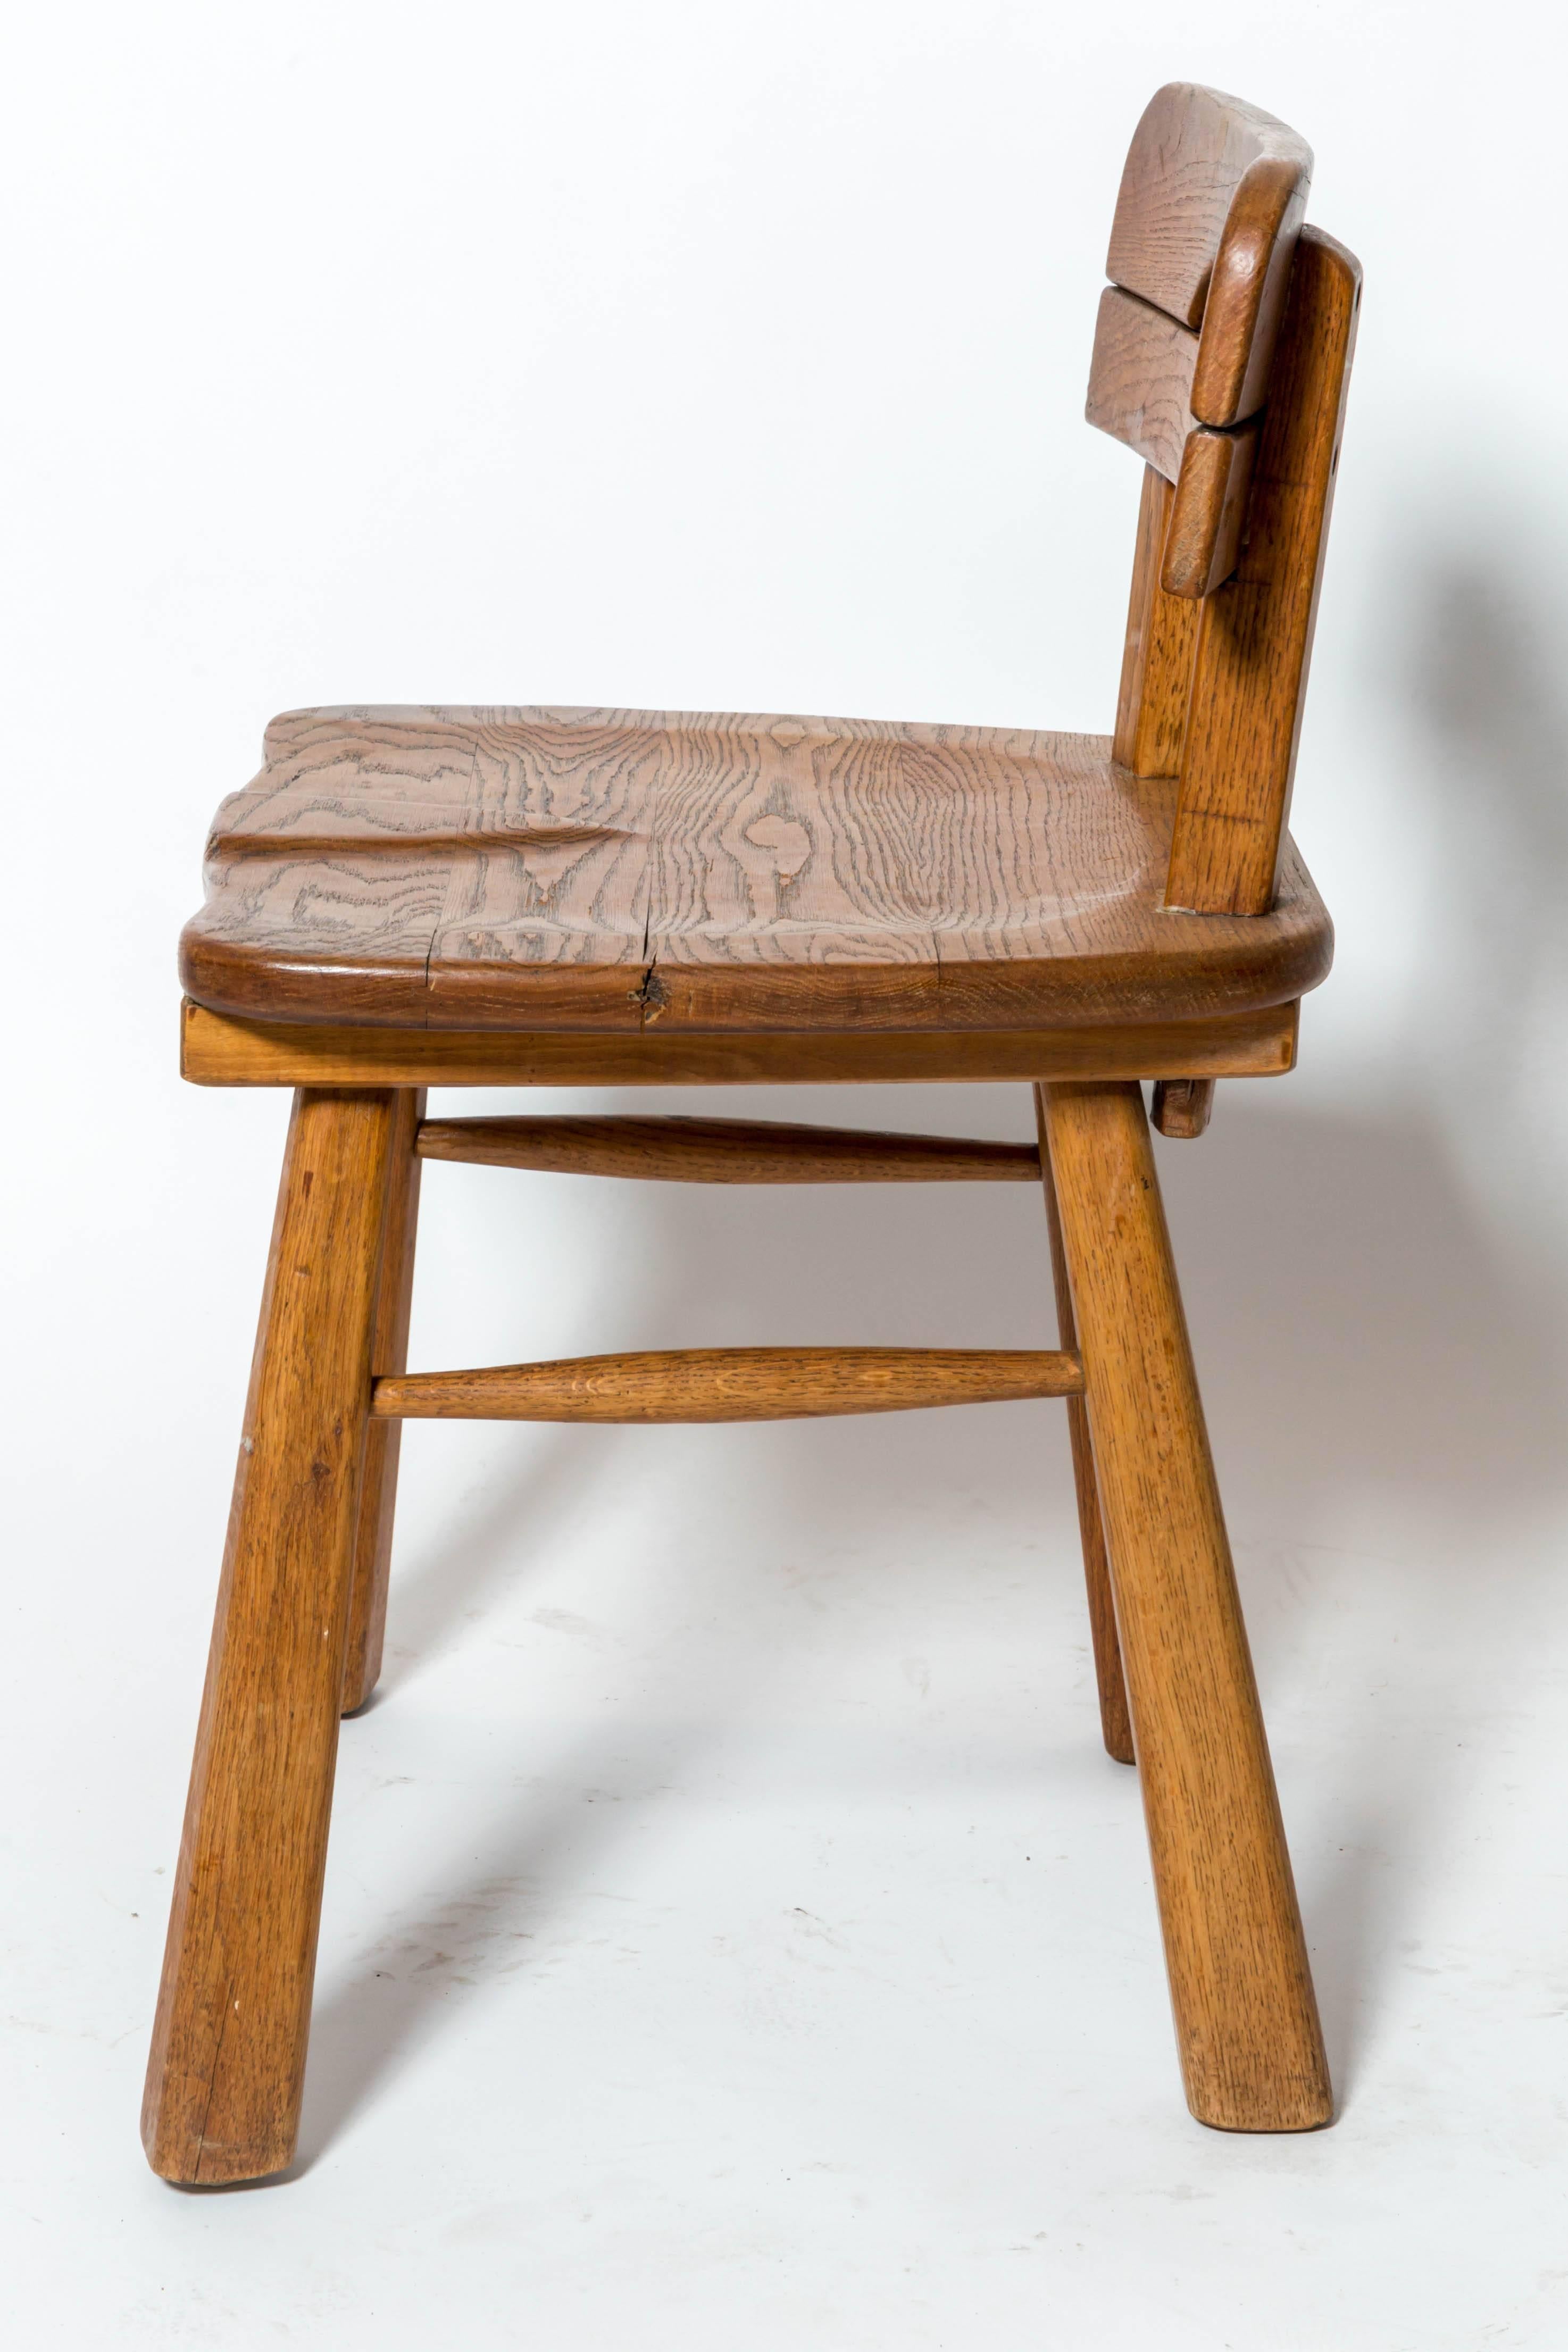 Mid-20th Century Brutalist Oak Stool with Back by Cercle Jean Touret for Marolles